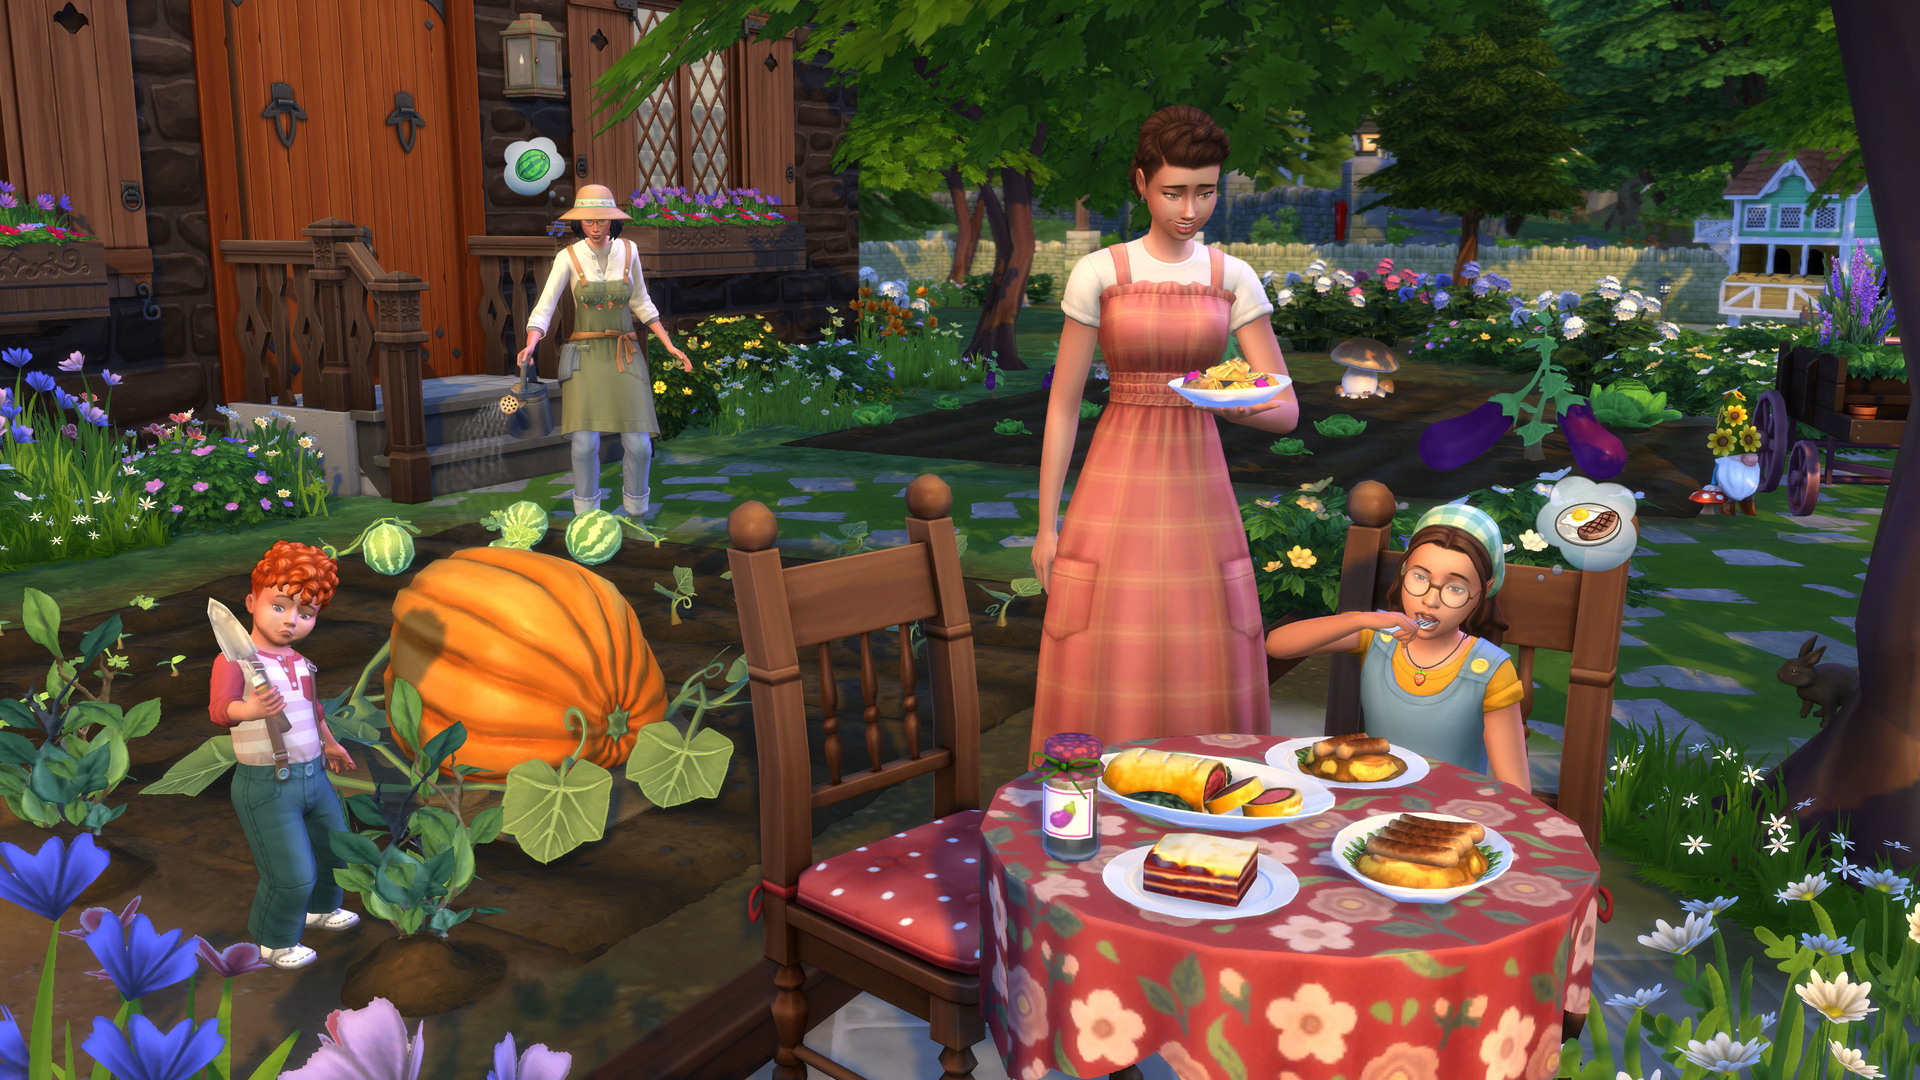 The Sims 4: Cottage Living - screenshot 3